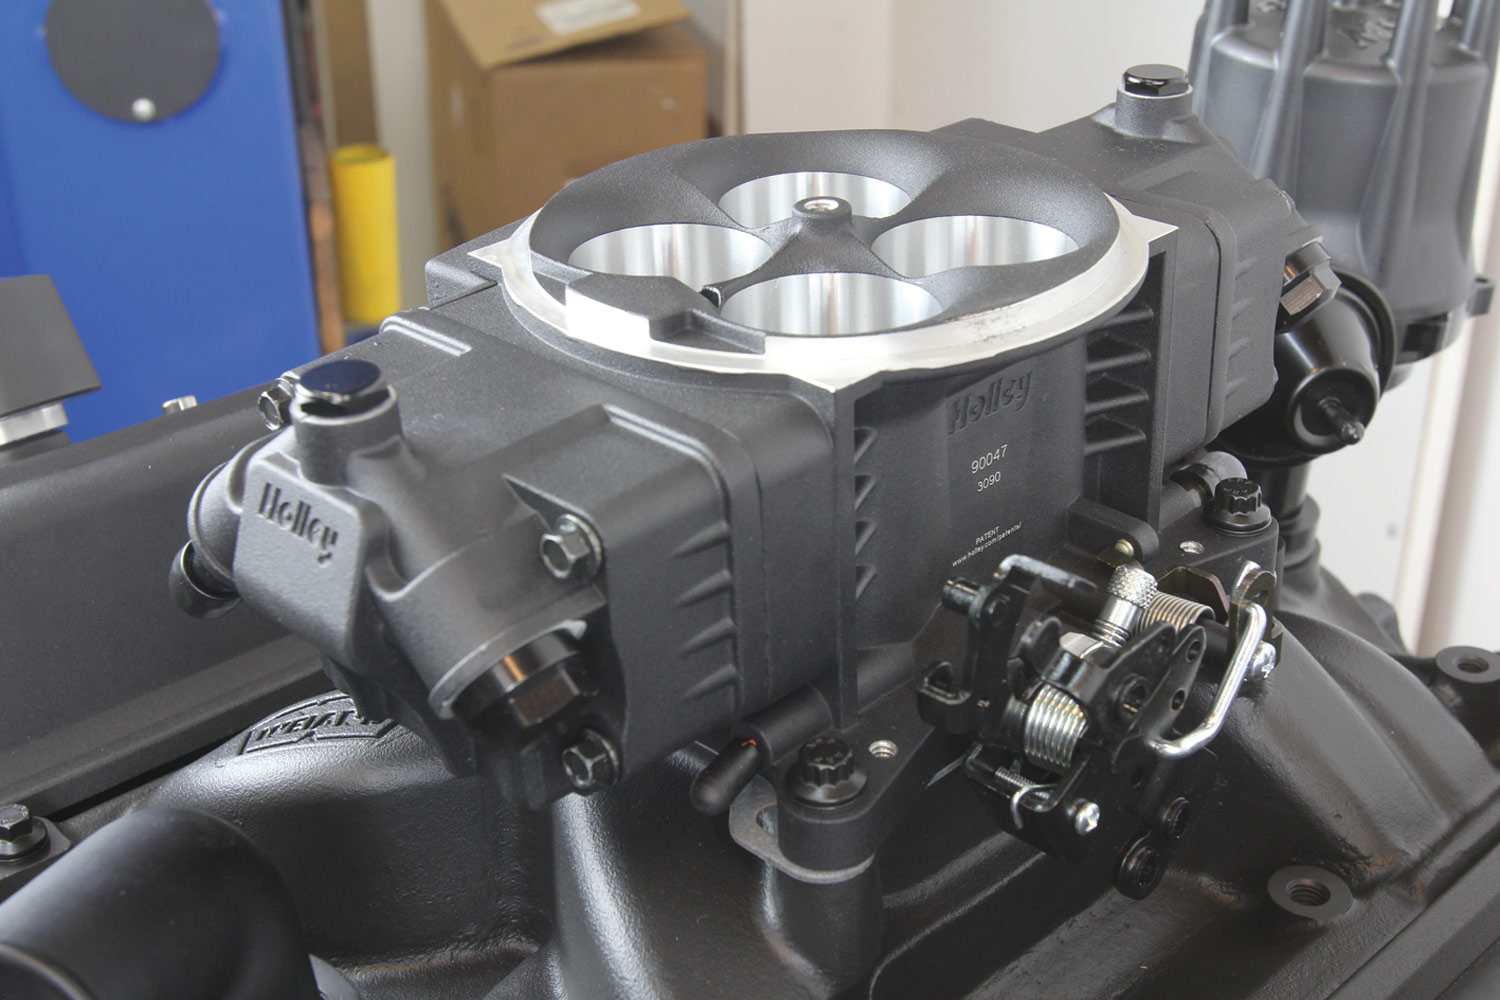 back view of the chosen throttle body, a Holley Sniper EFI Stealth 4150 (PN SNE-550-871) in black